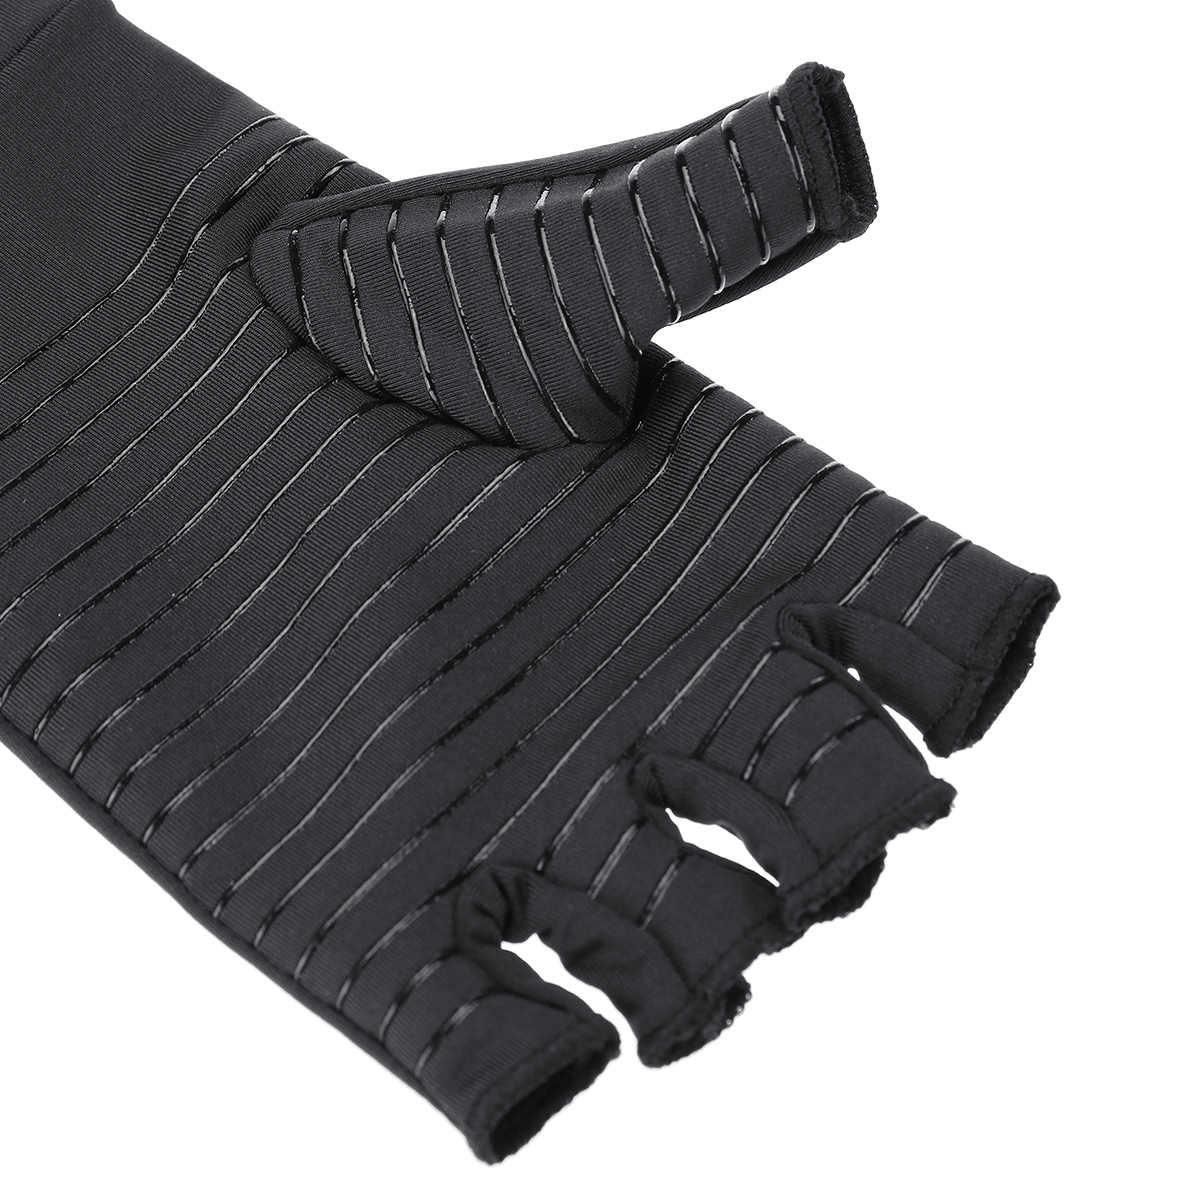 1-Pair-Compression-Gloves-with-Copper-for-Arthritis-RheumatoidRelief-Pain-and-SwellingOsteoarthritis-1755584-11